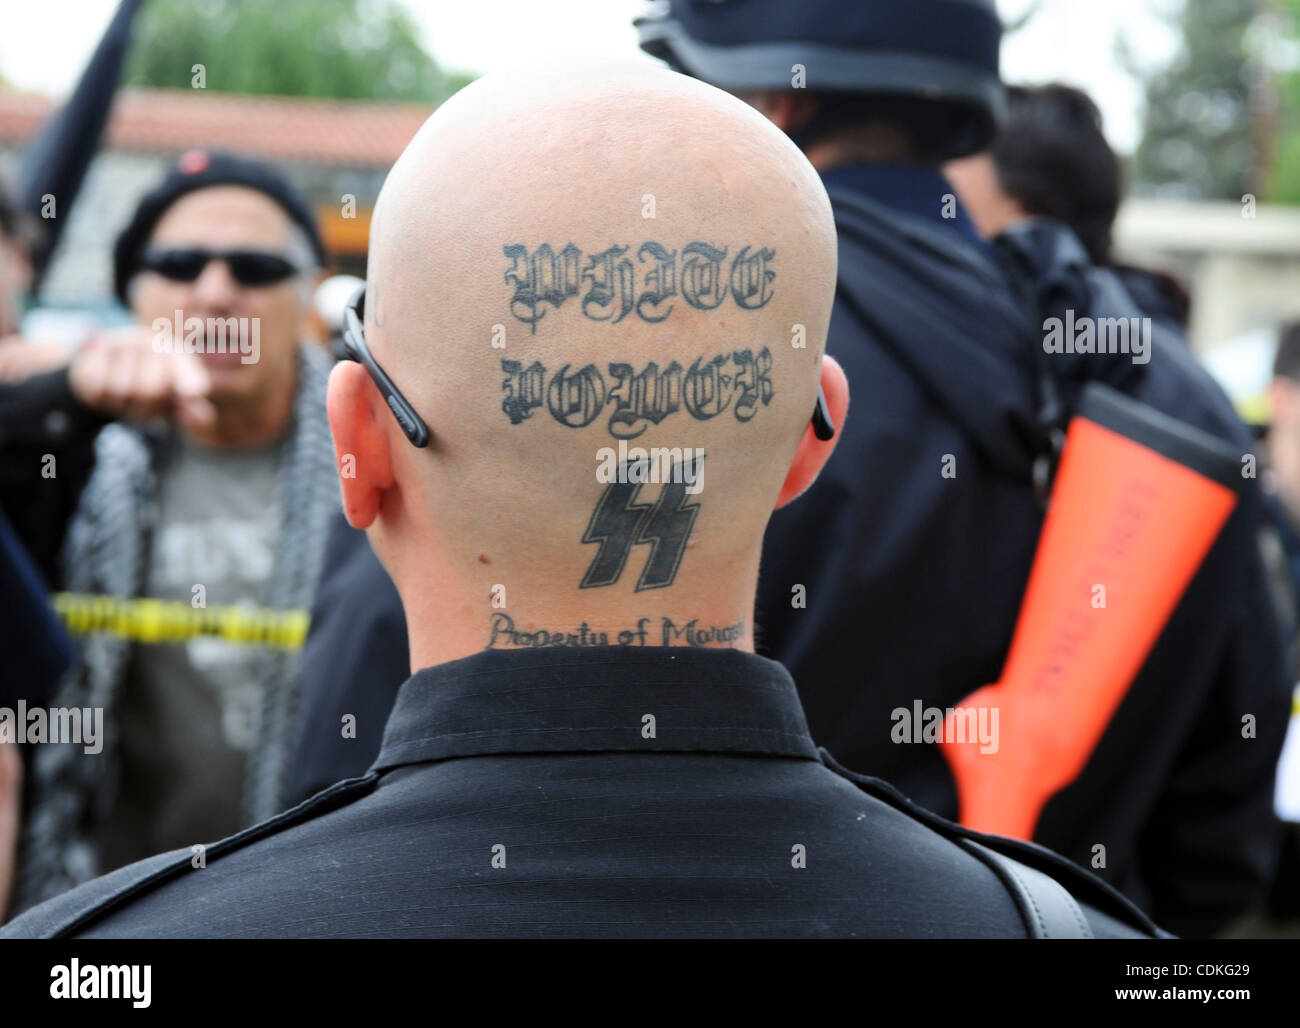 Mar 19, 2011 - Claremont, California, U.S. - Members of the National Socialist Movement rally in Claremont, California, east of Los Angeles on Saturday. (Credit Image: &#169; Josh Edelson/ZUMAPRESS.com) Stock Photo